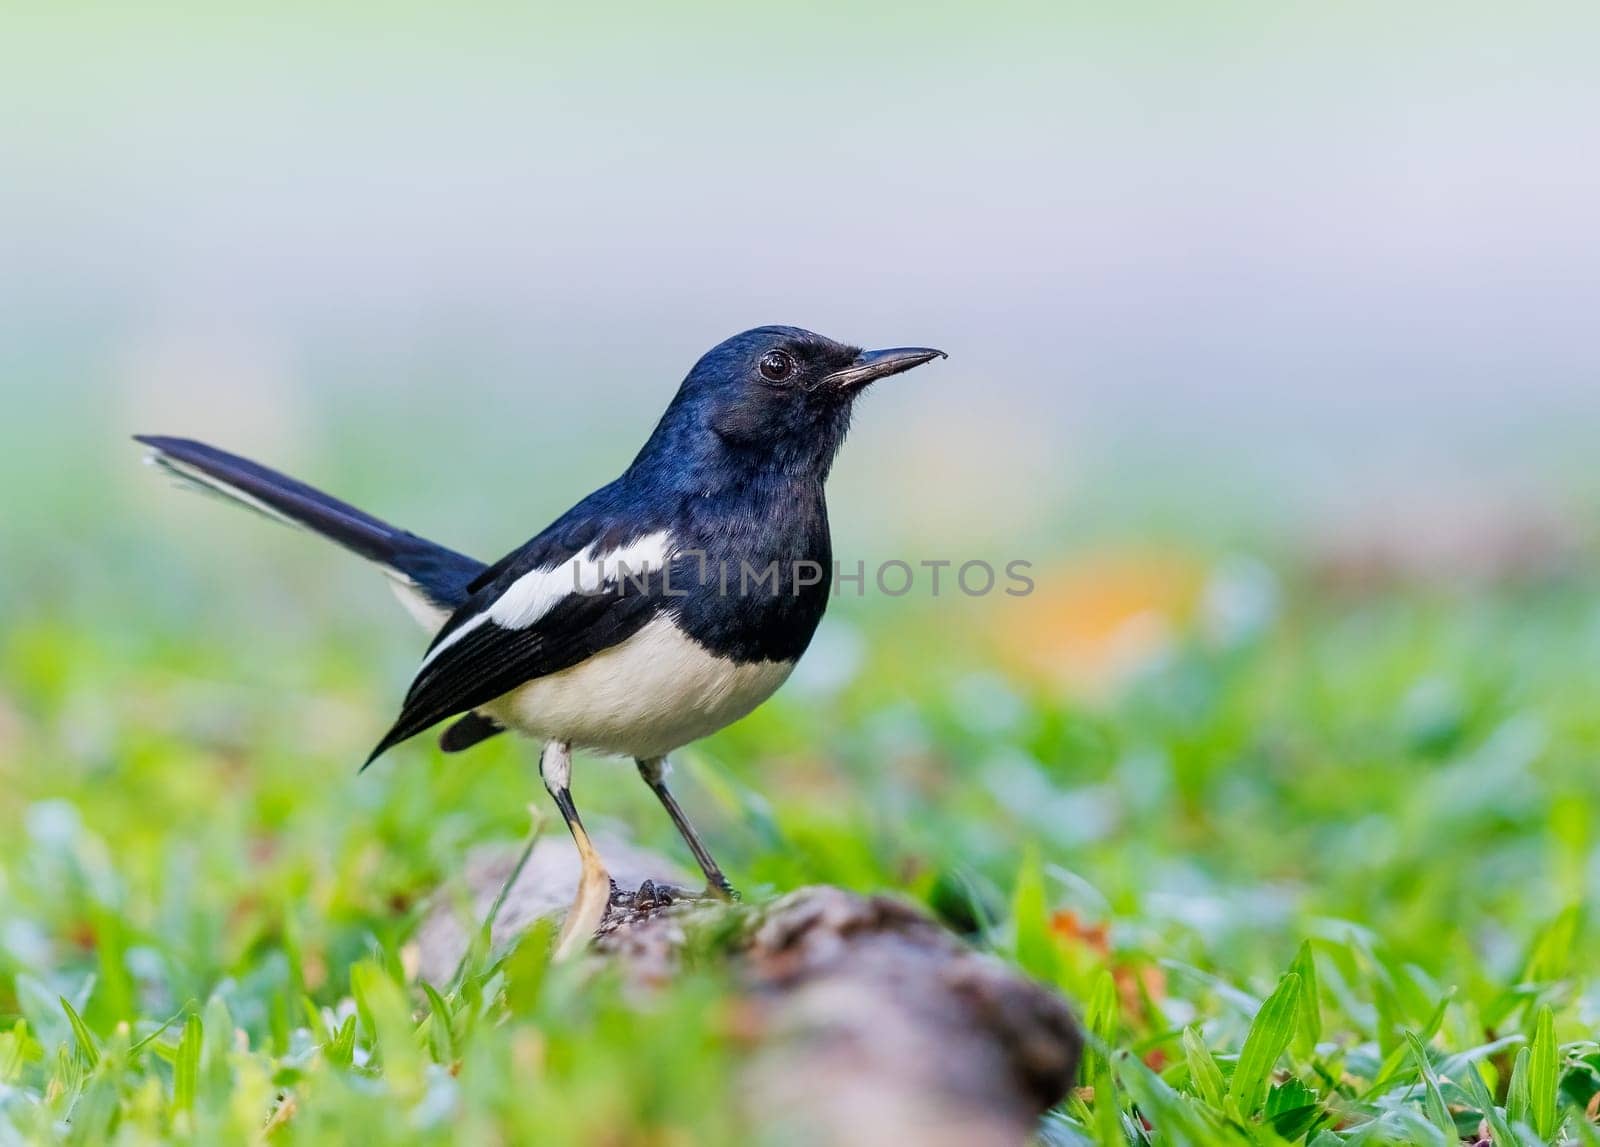 Oriental Magpie Robin perched on a tree root in Bangkok Thailand